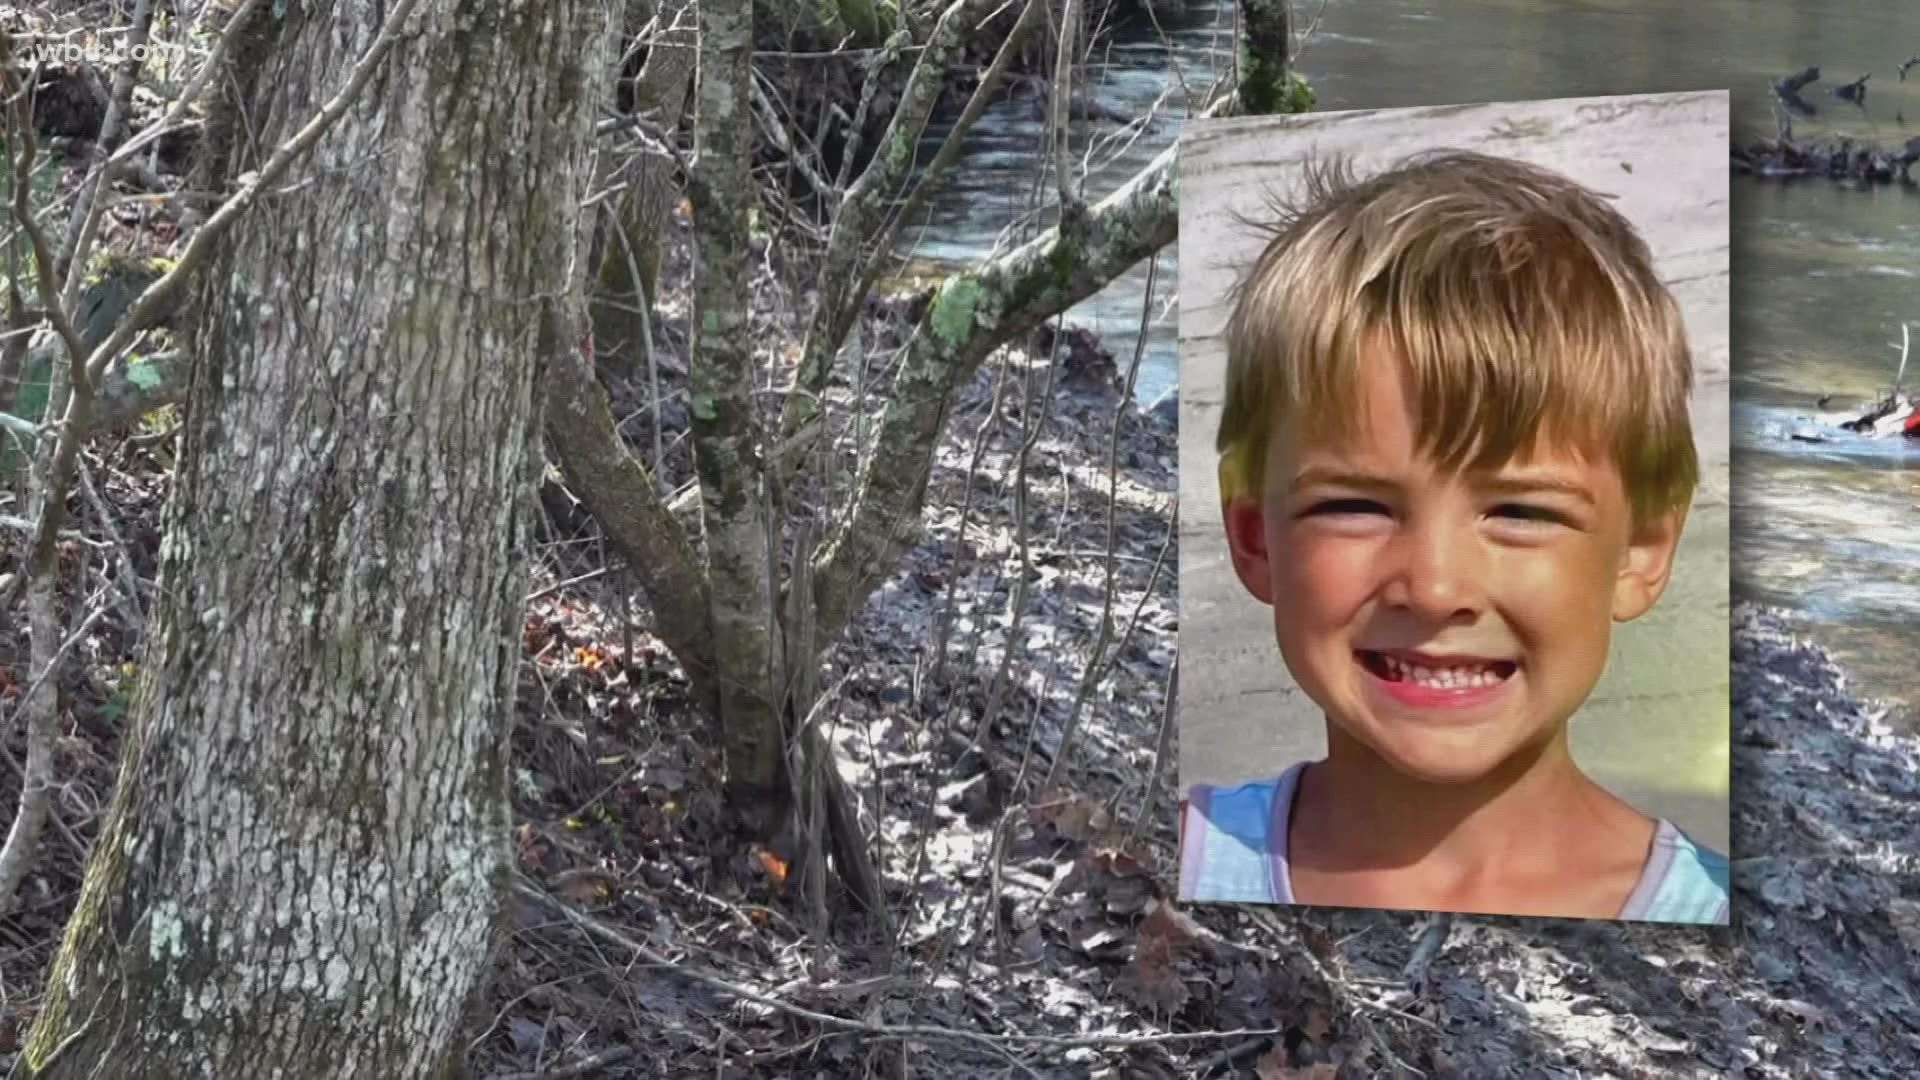 Good Samaritans who helped search for the child  Friday morning found him curled up by a tree next to a creek.